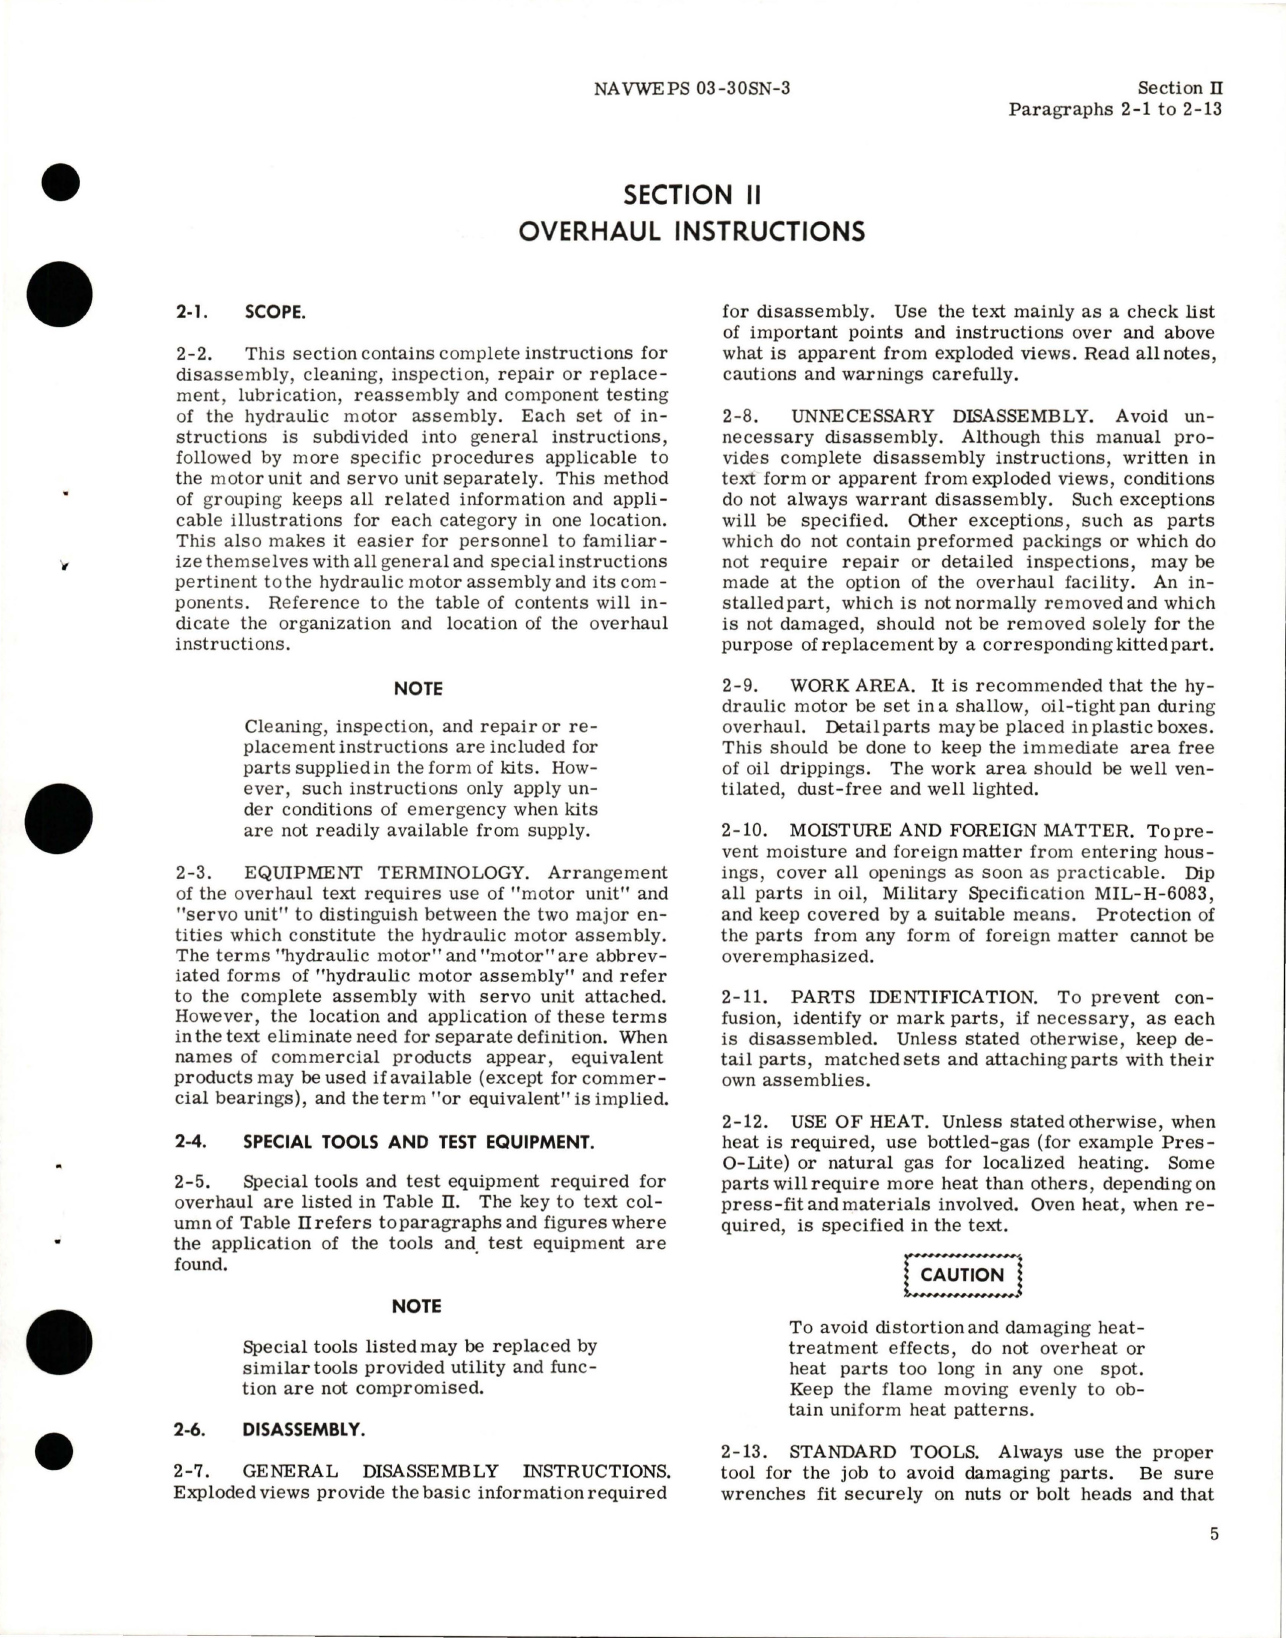 Sample page 9 from AirCorps Library document: Overhaul Instructions for Hydraulic Motor - Model MV029-CSV-1 - Part 827286B